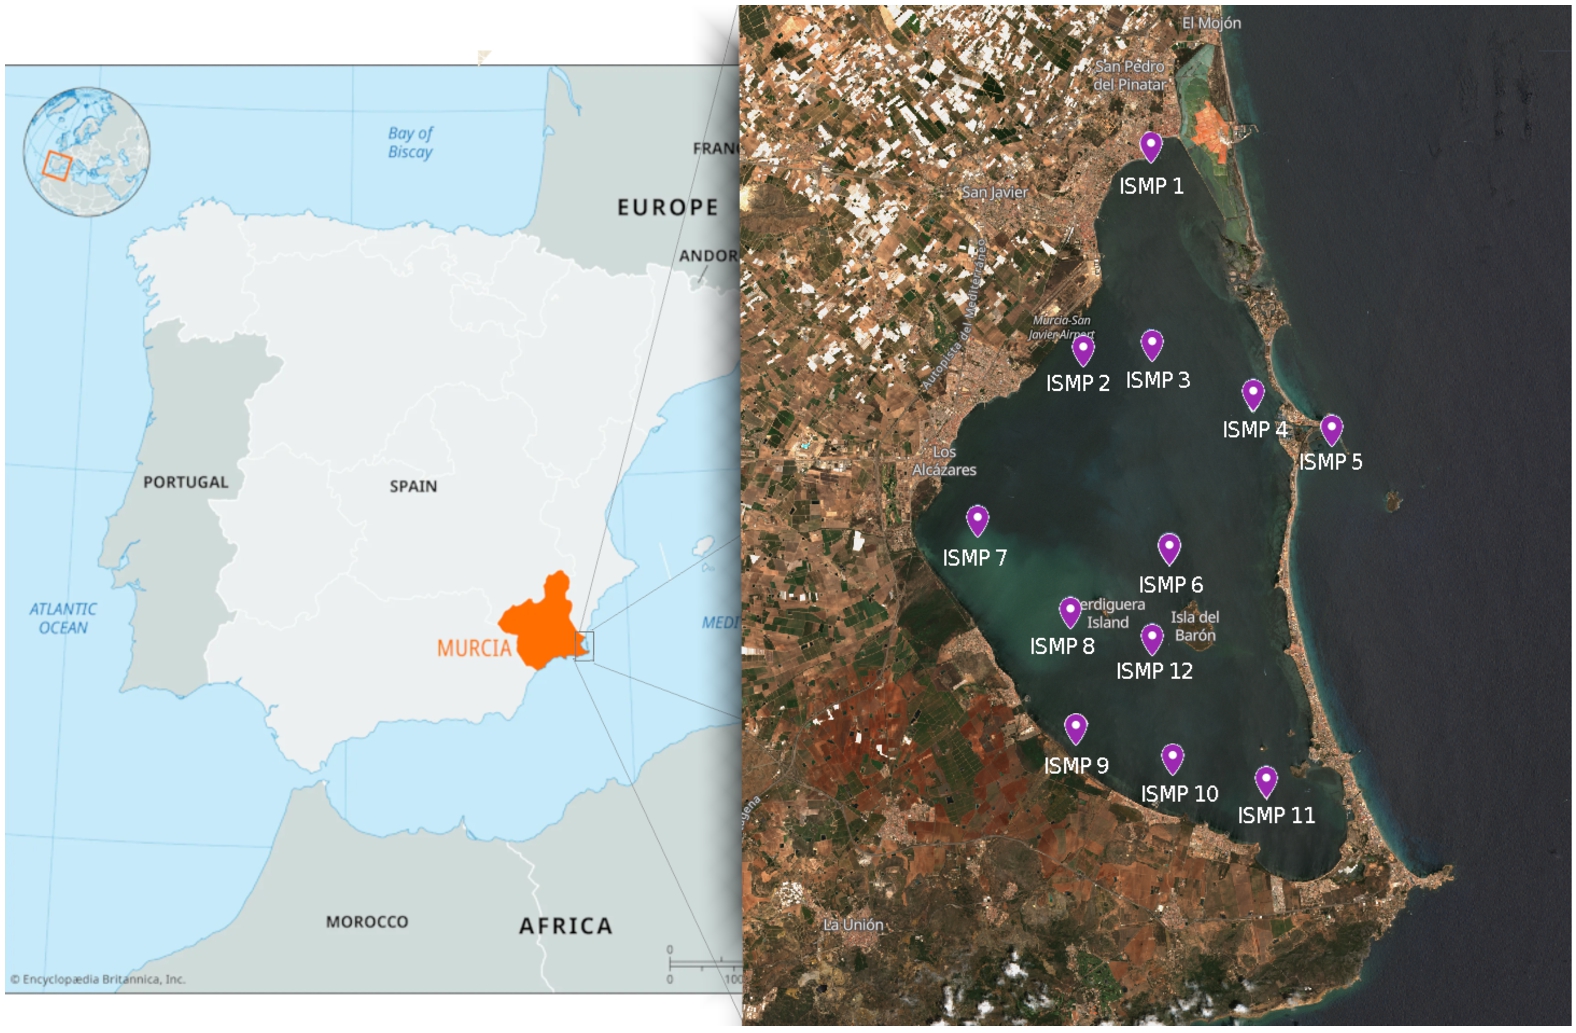 In situ monitoring points (ISMP) undertaken by the Regional Government of Murcia (CARM) in the Mar Menor.